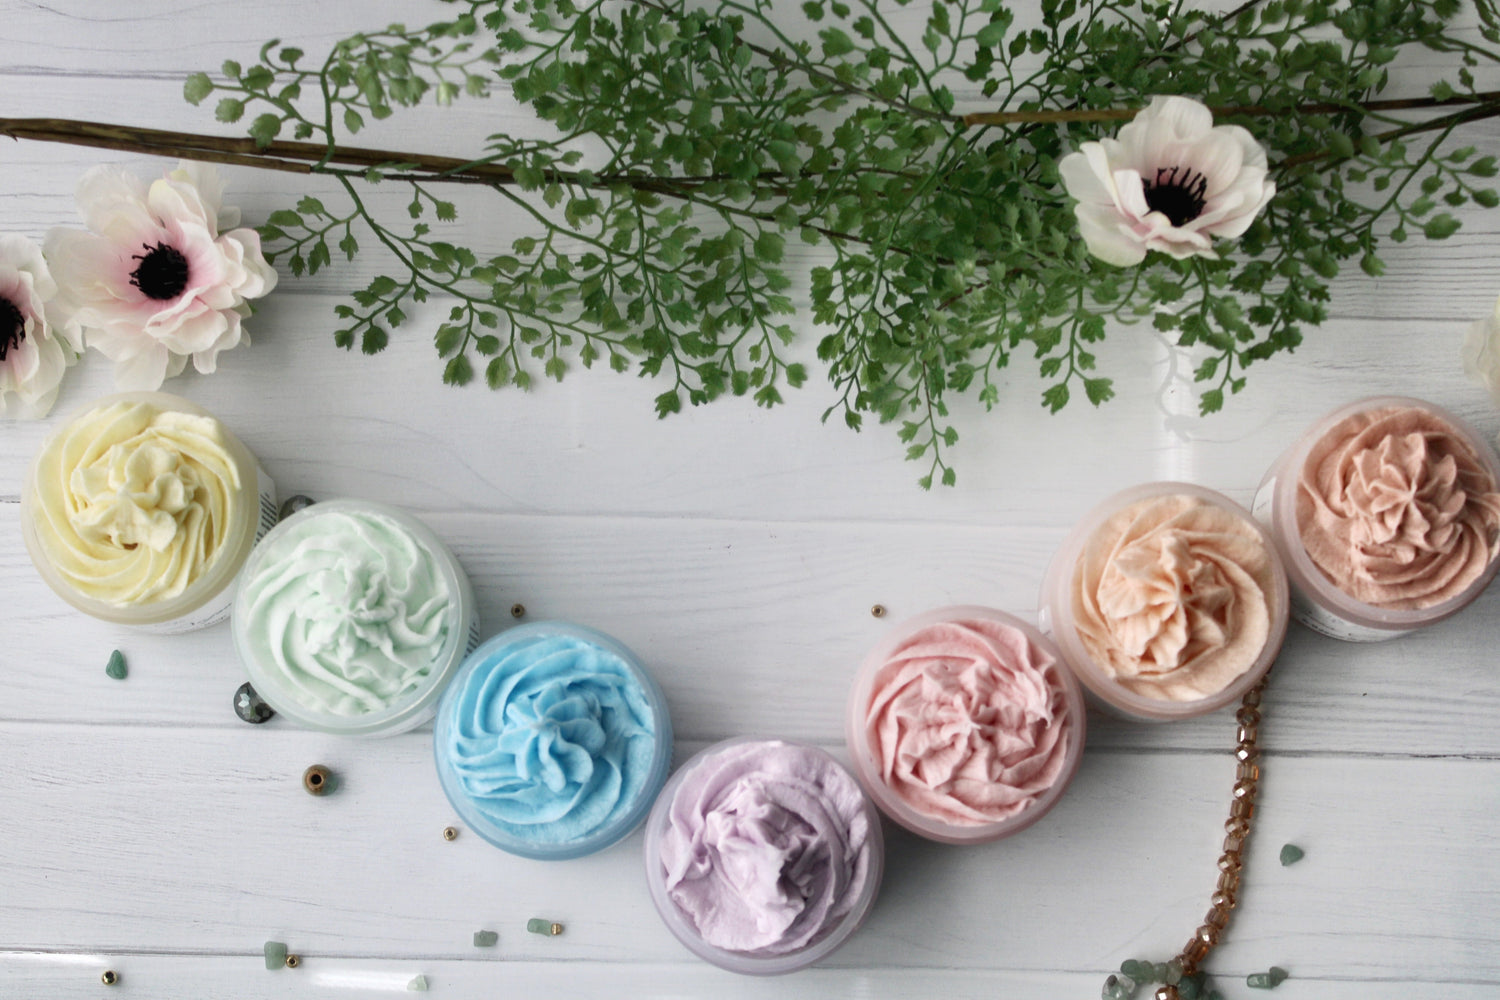 Whipped Sugar Soaps